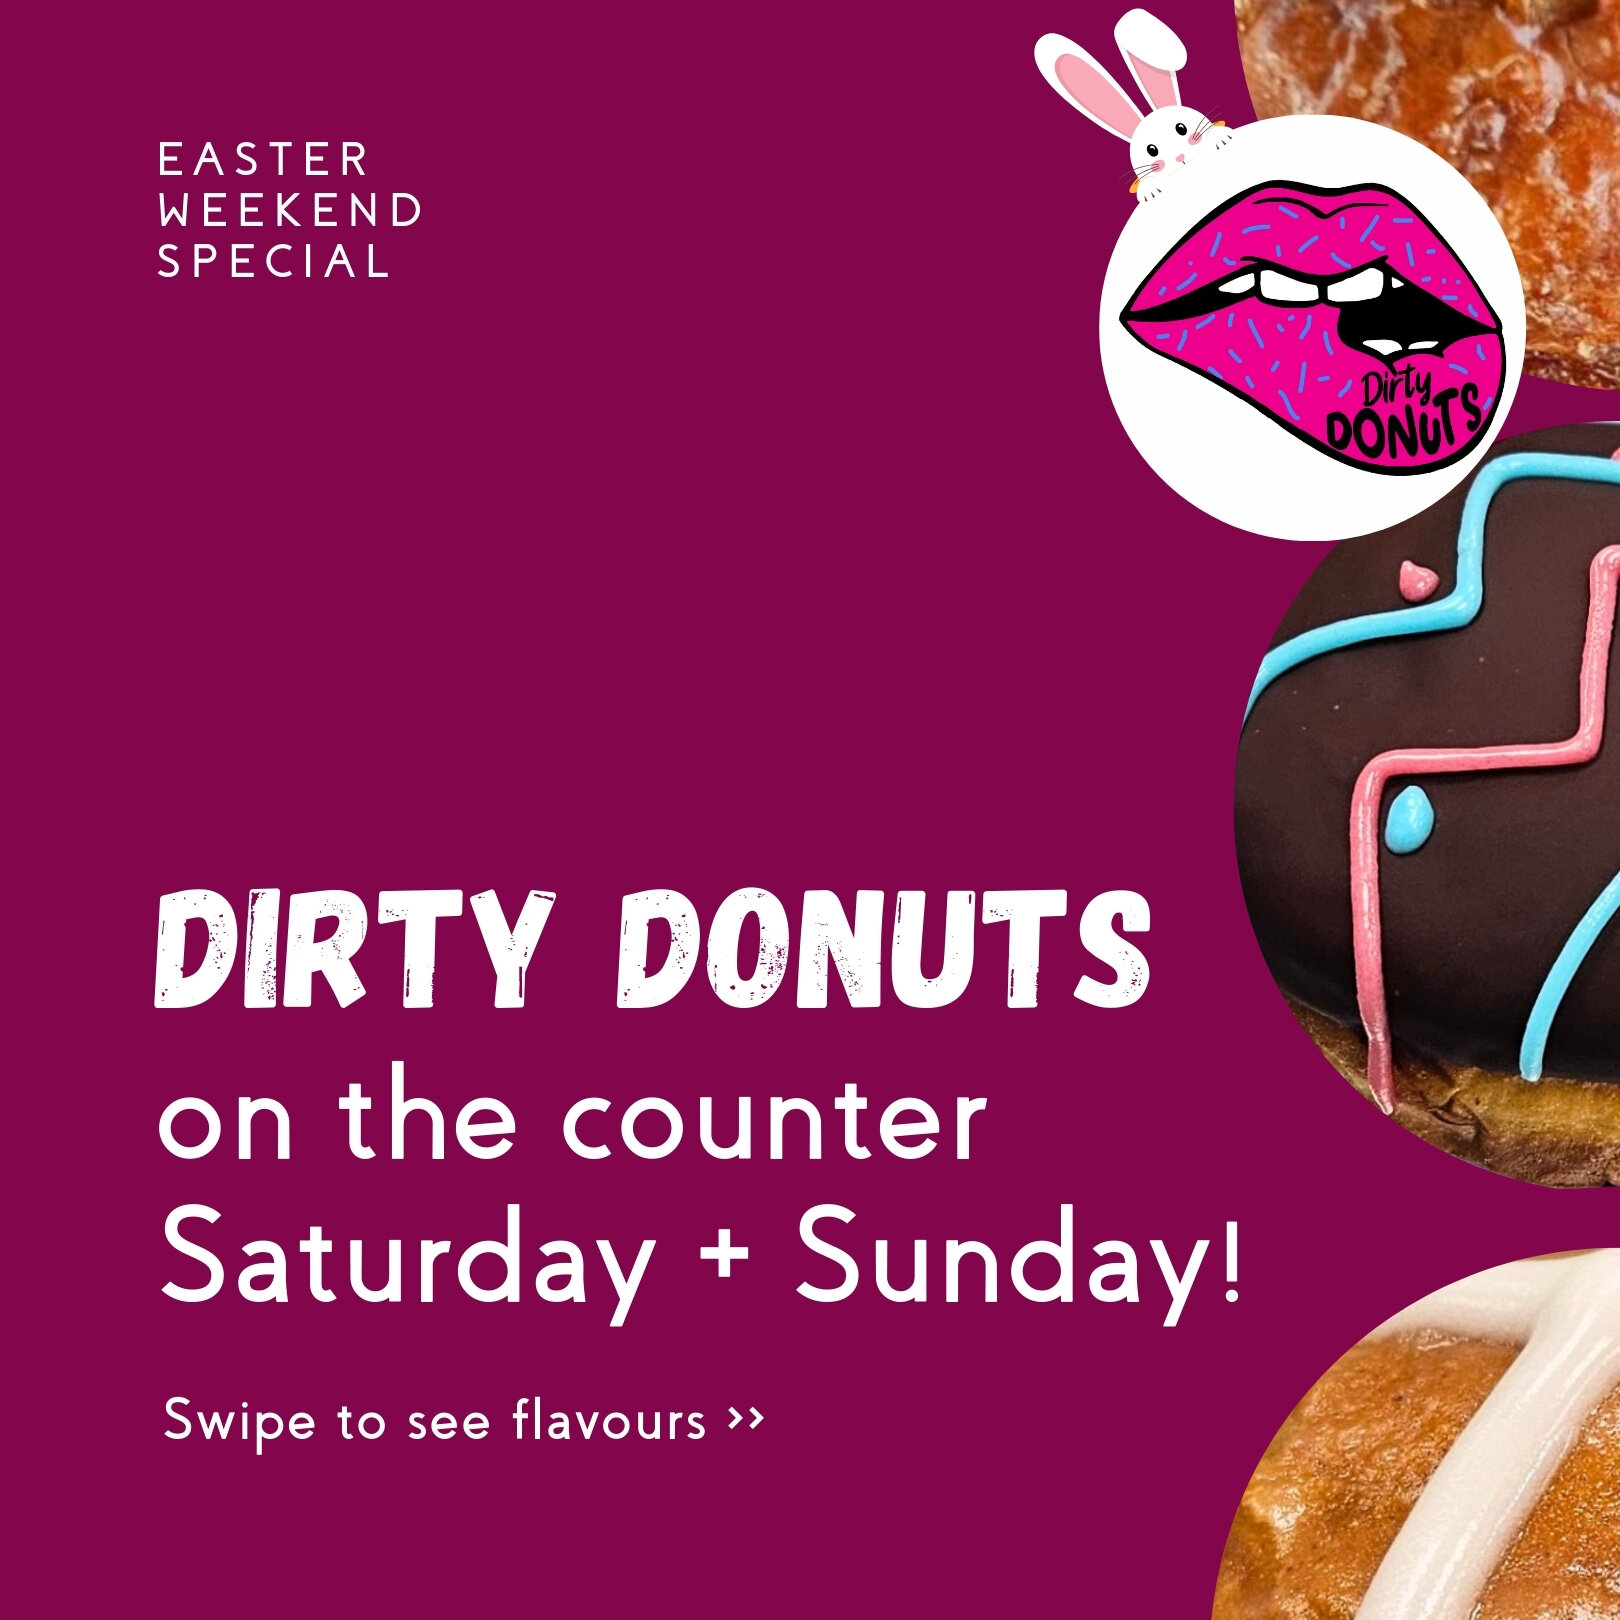 Naughty Easter Treats from @dirtydonutsnz this weekend! 🍩😻

Feeling like a little devilish sweet this Easter? Pop into @glasshousecafe where you'll find three special flavours to choose from...

🍫 Chocolate &amp; Caramel
🍪 Hot Cross Biscoff
🍎 Ap